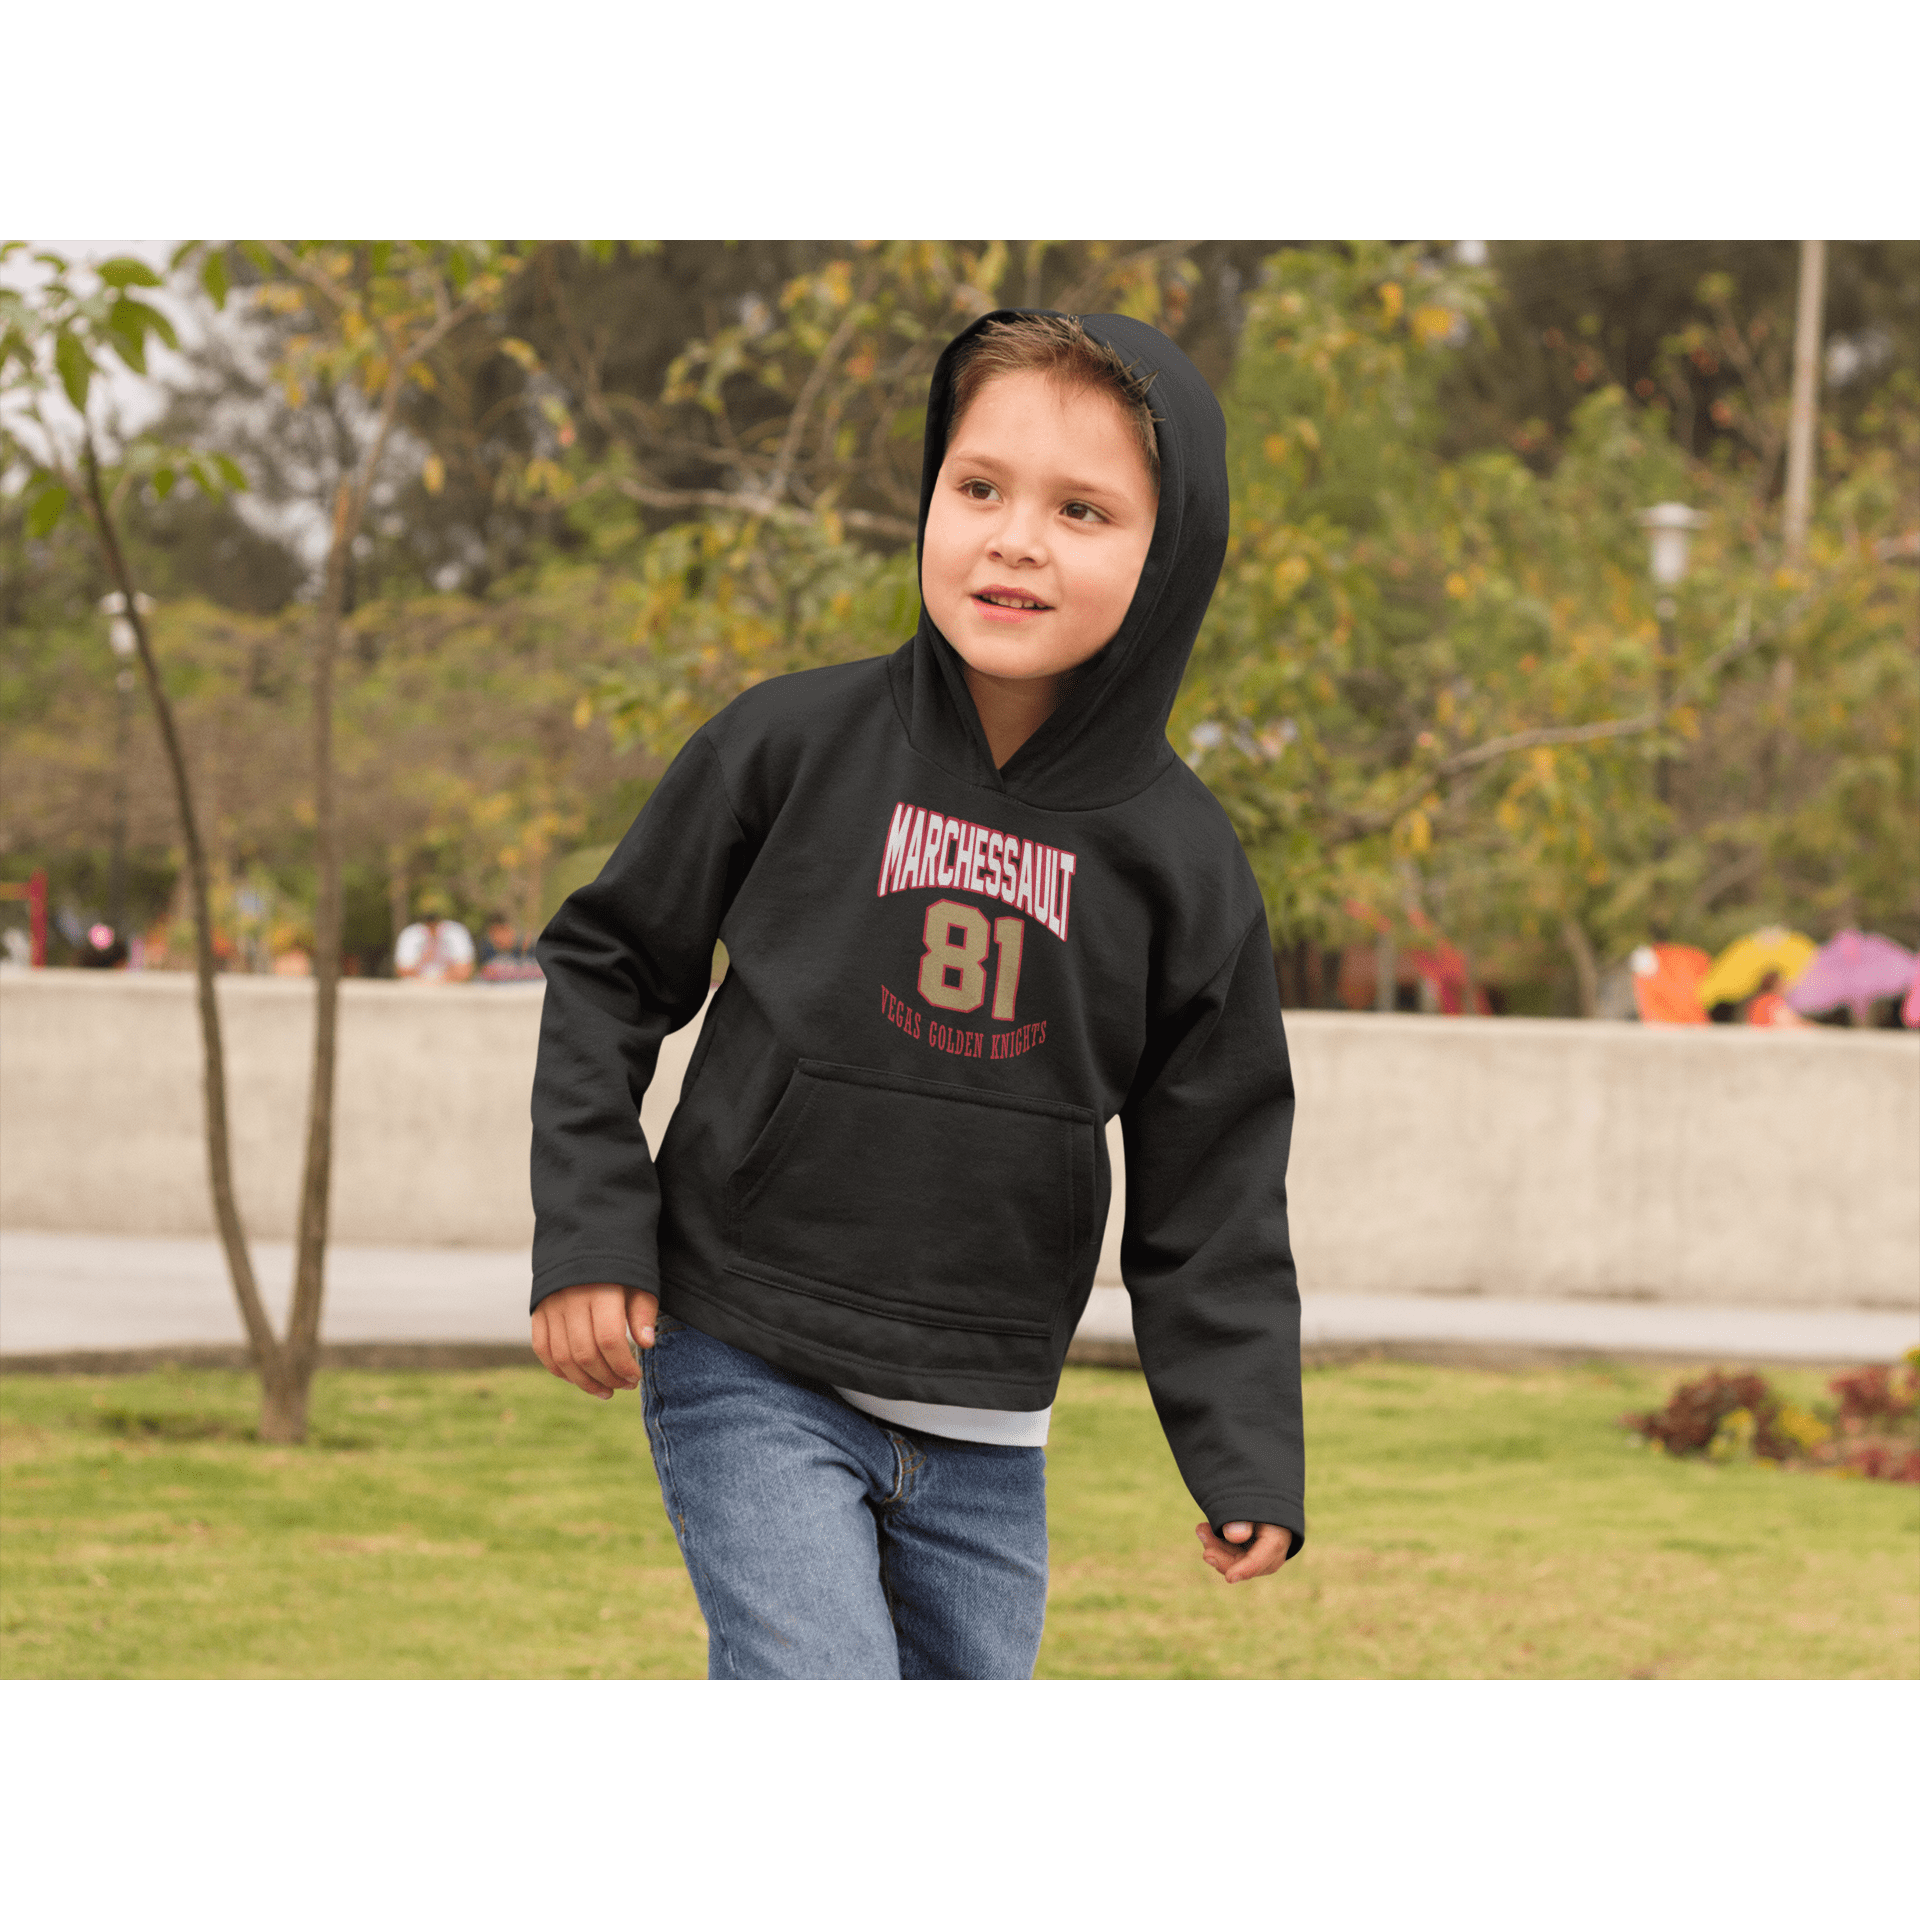 Kids clothes Marchessault 81 Vegas Golden Knights Retro Youth Hooded Sweatshirt